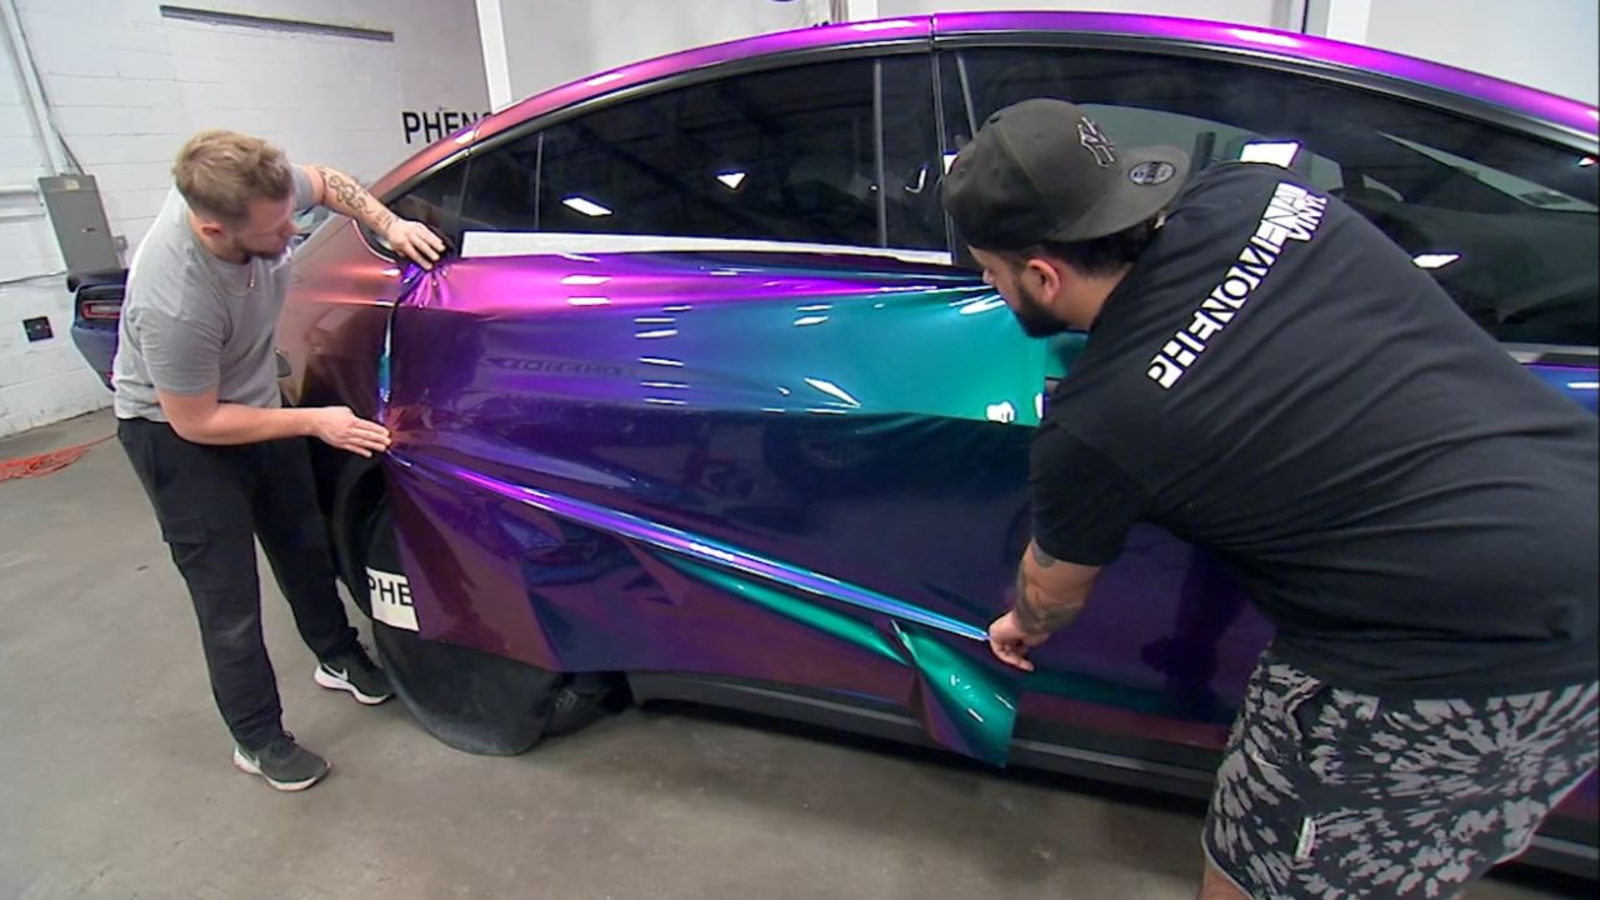 That new car look: Vinyl wrapping transforms customization business